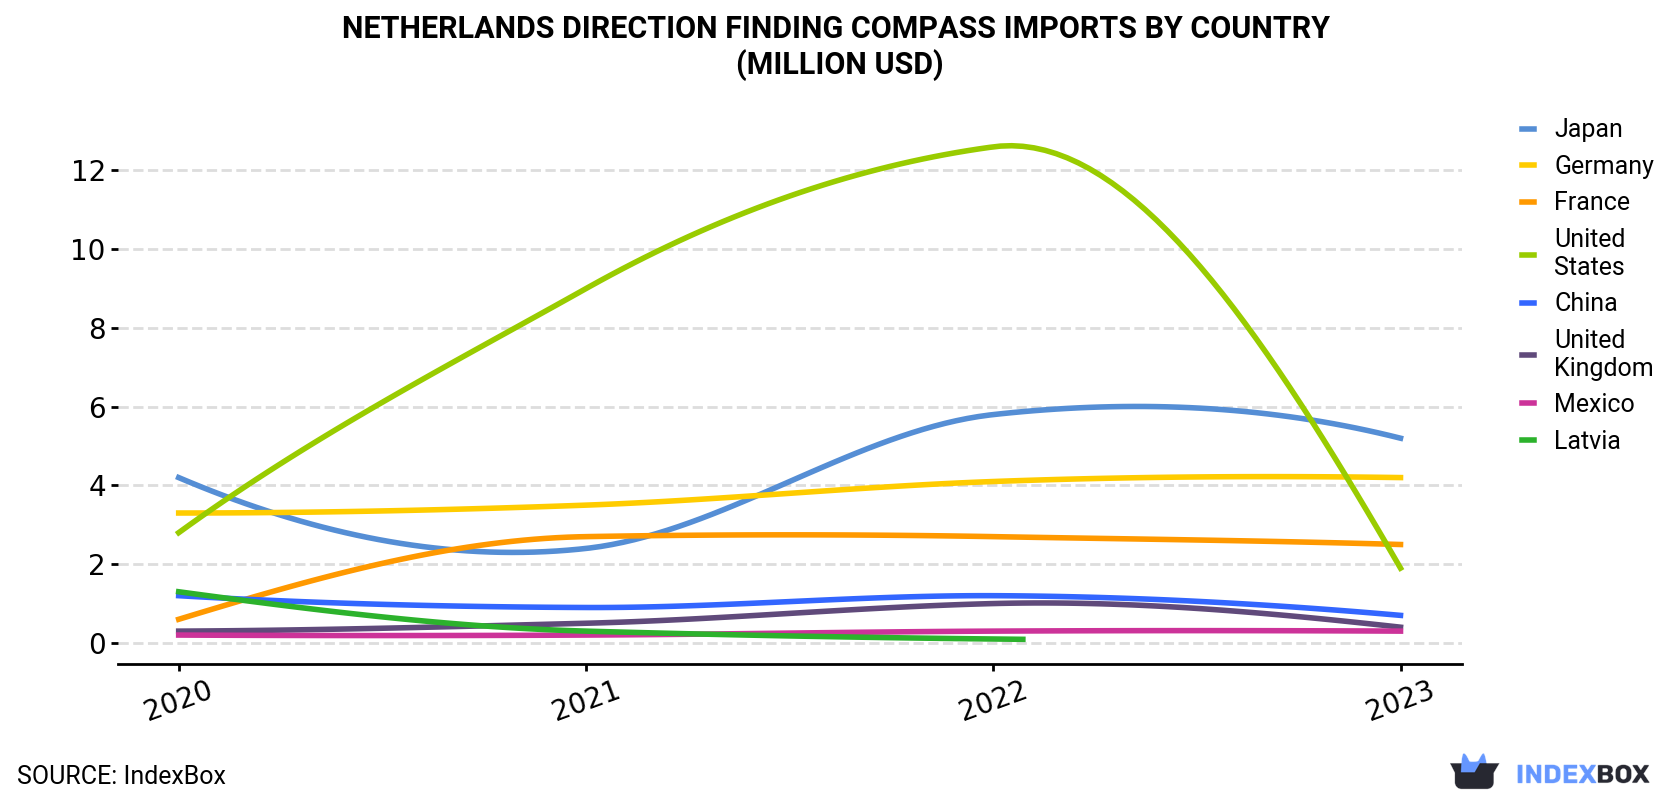 Netherlands Direction Finding Compass Imports By Country (Million USD)